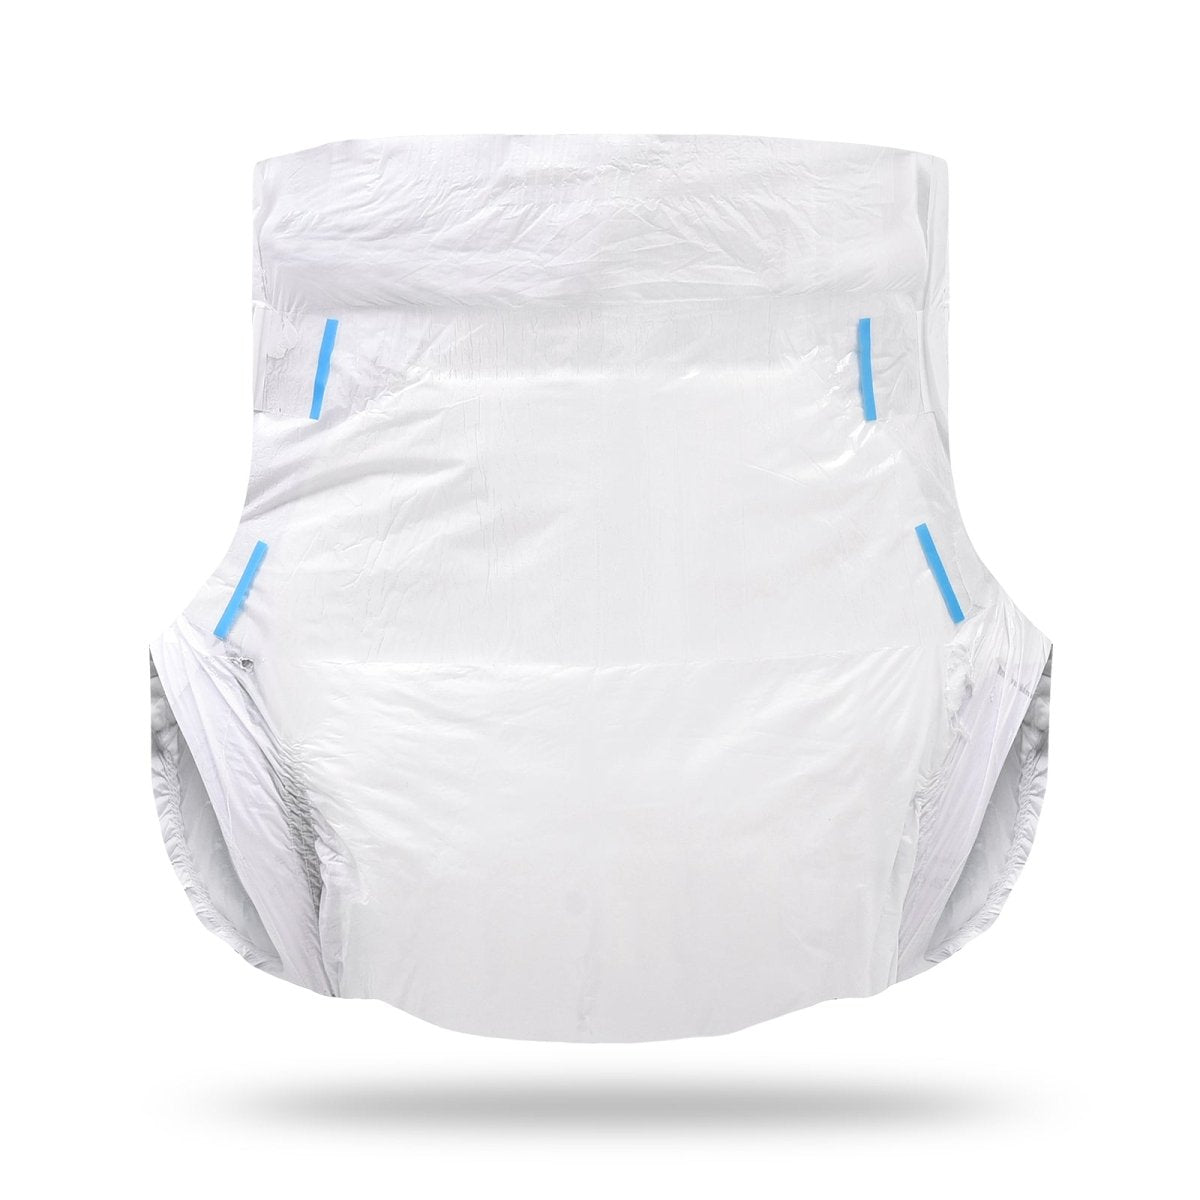 Landofgenie ABDL Diapers Overnight Adult White Diapers with High Absorbency - 2PCS - landofgenie